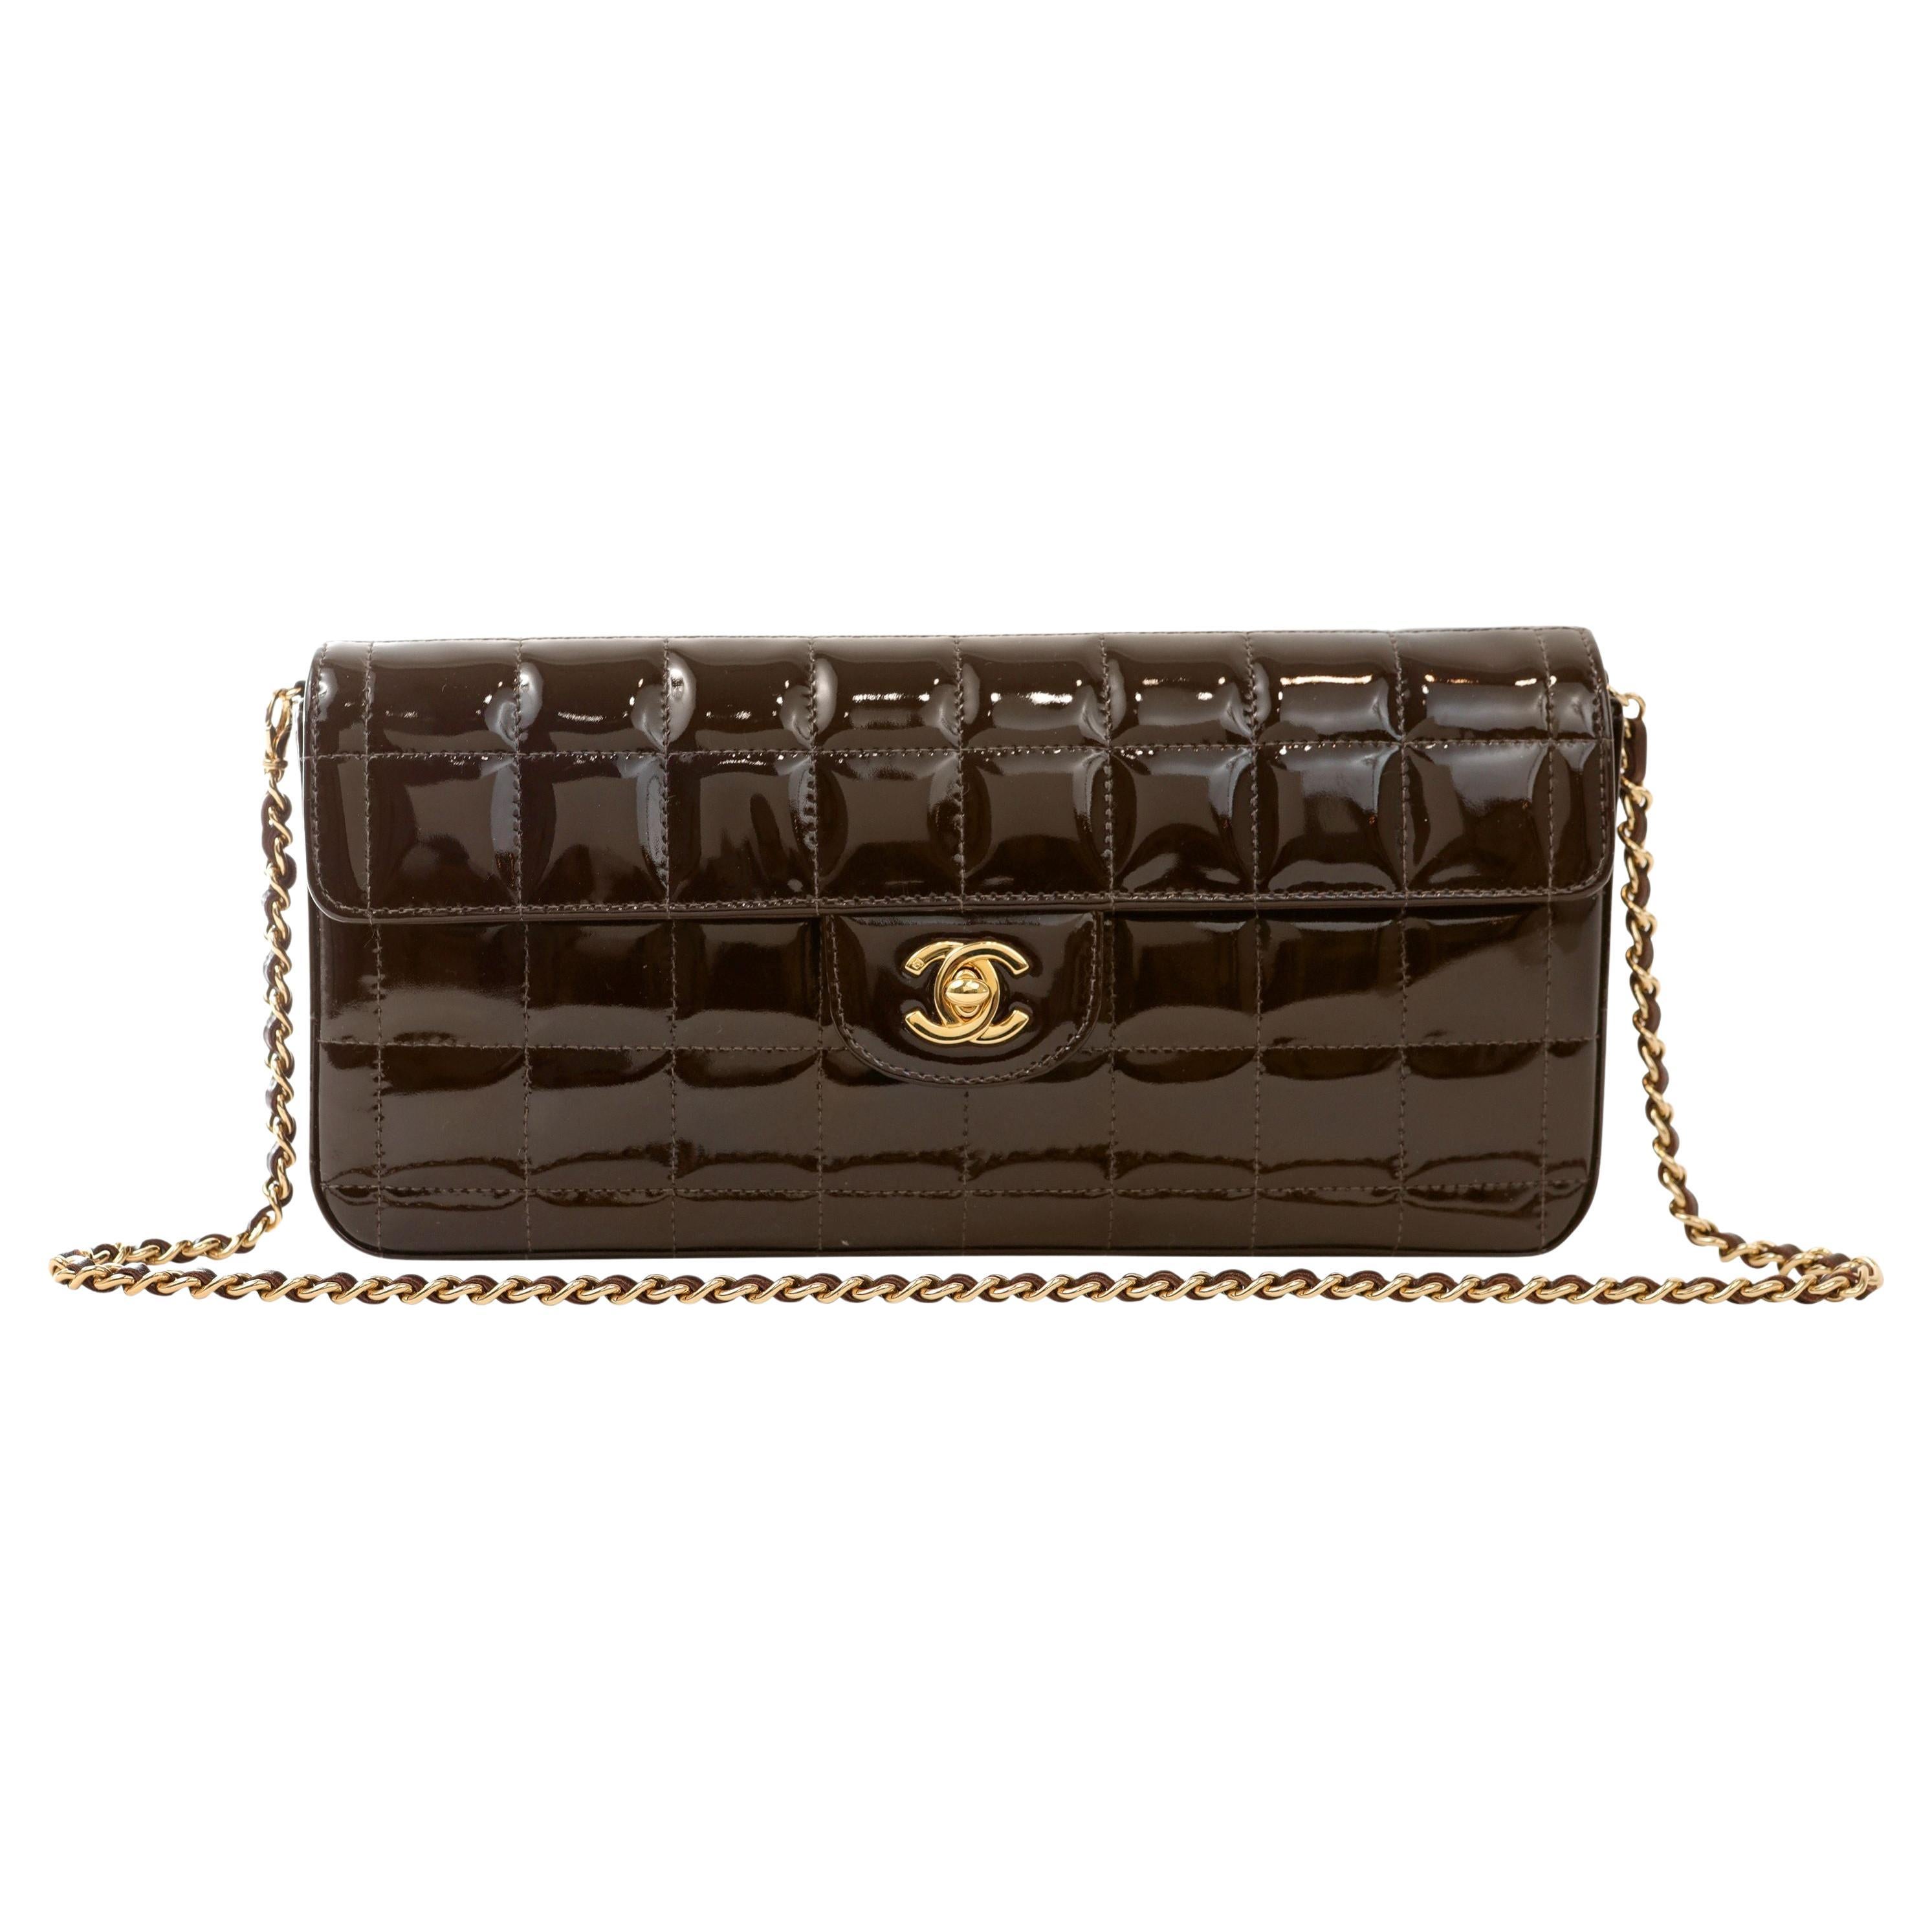 Chanel Brown Patent Leather Chocolate Bar East West Flap Bag